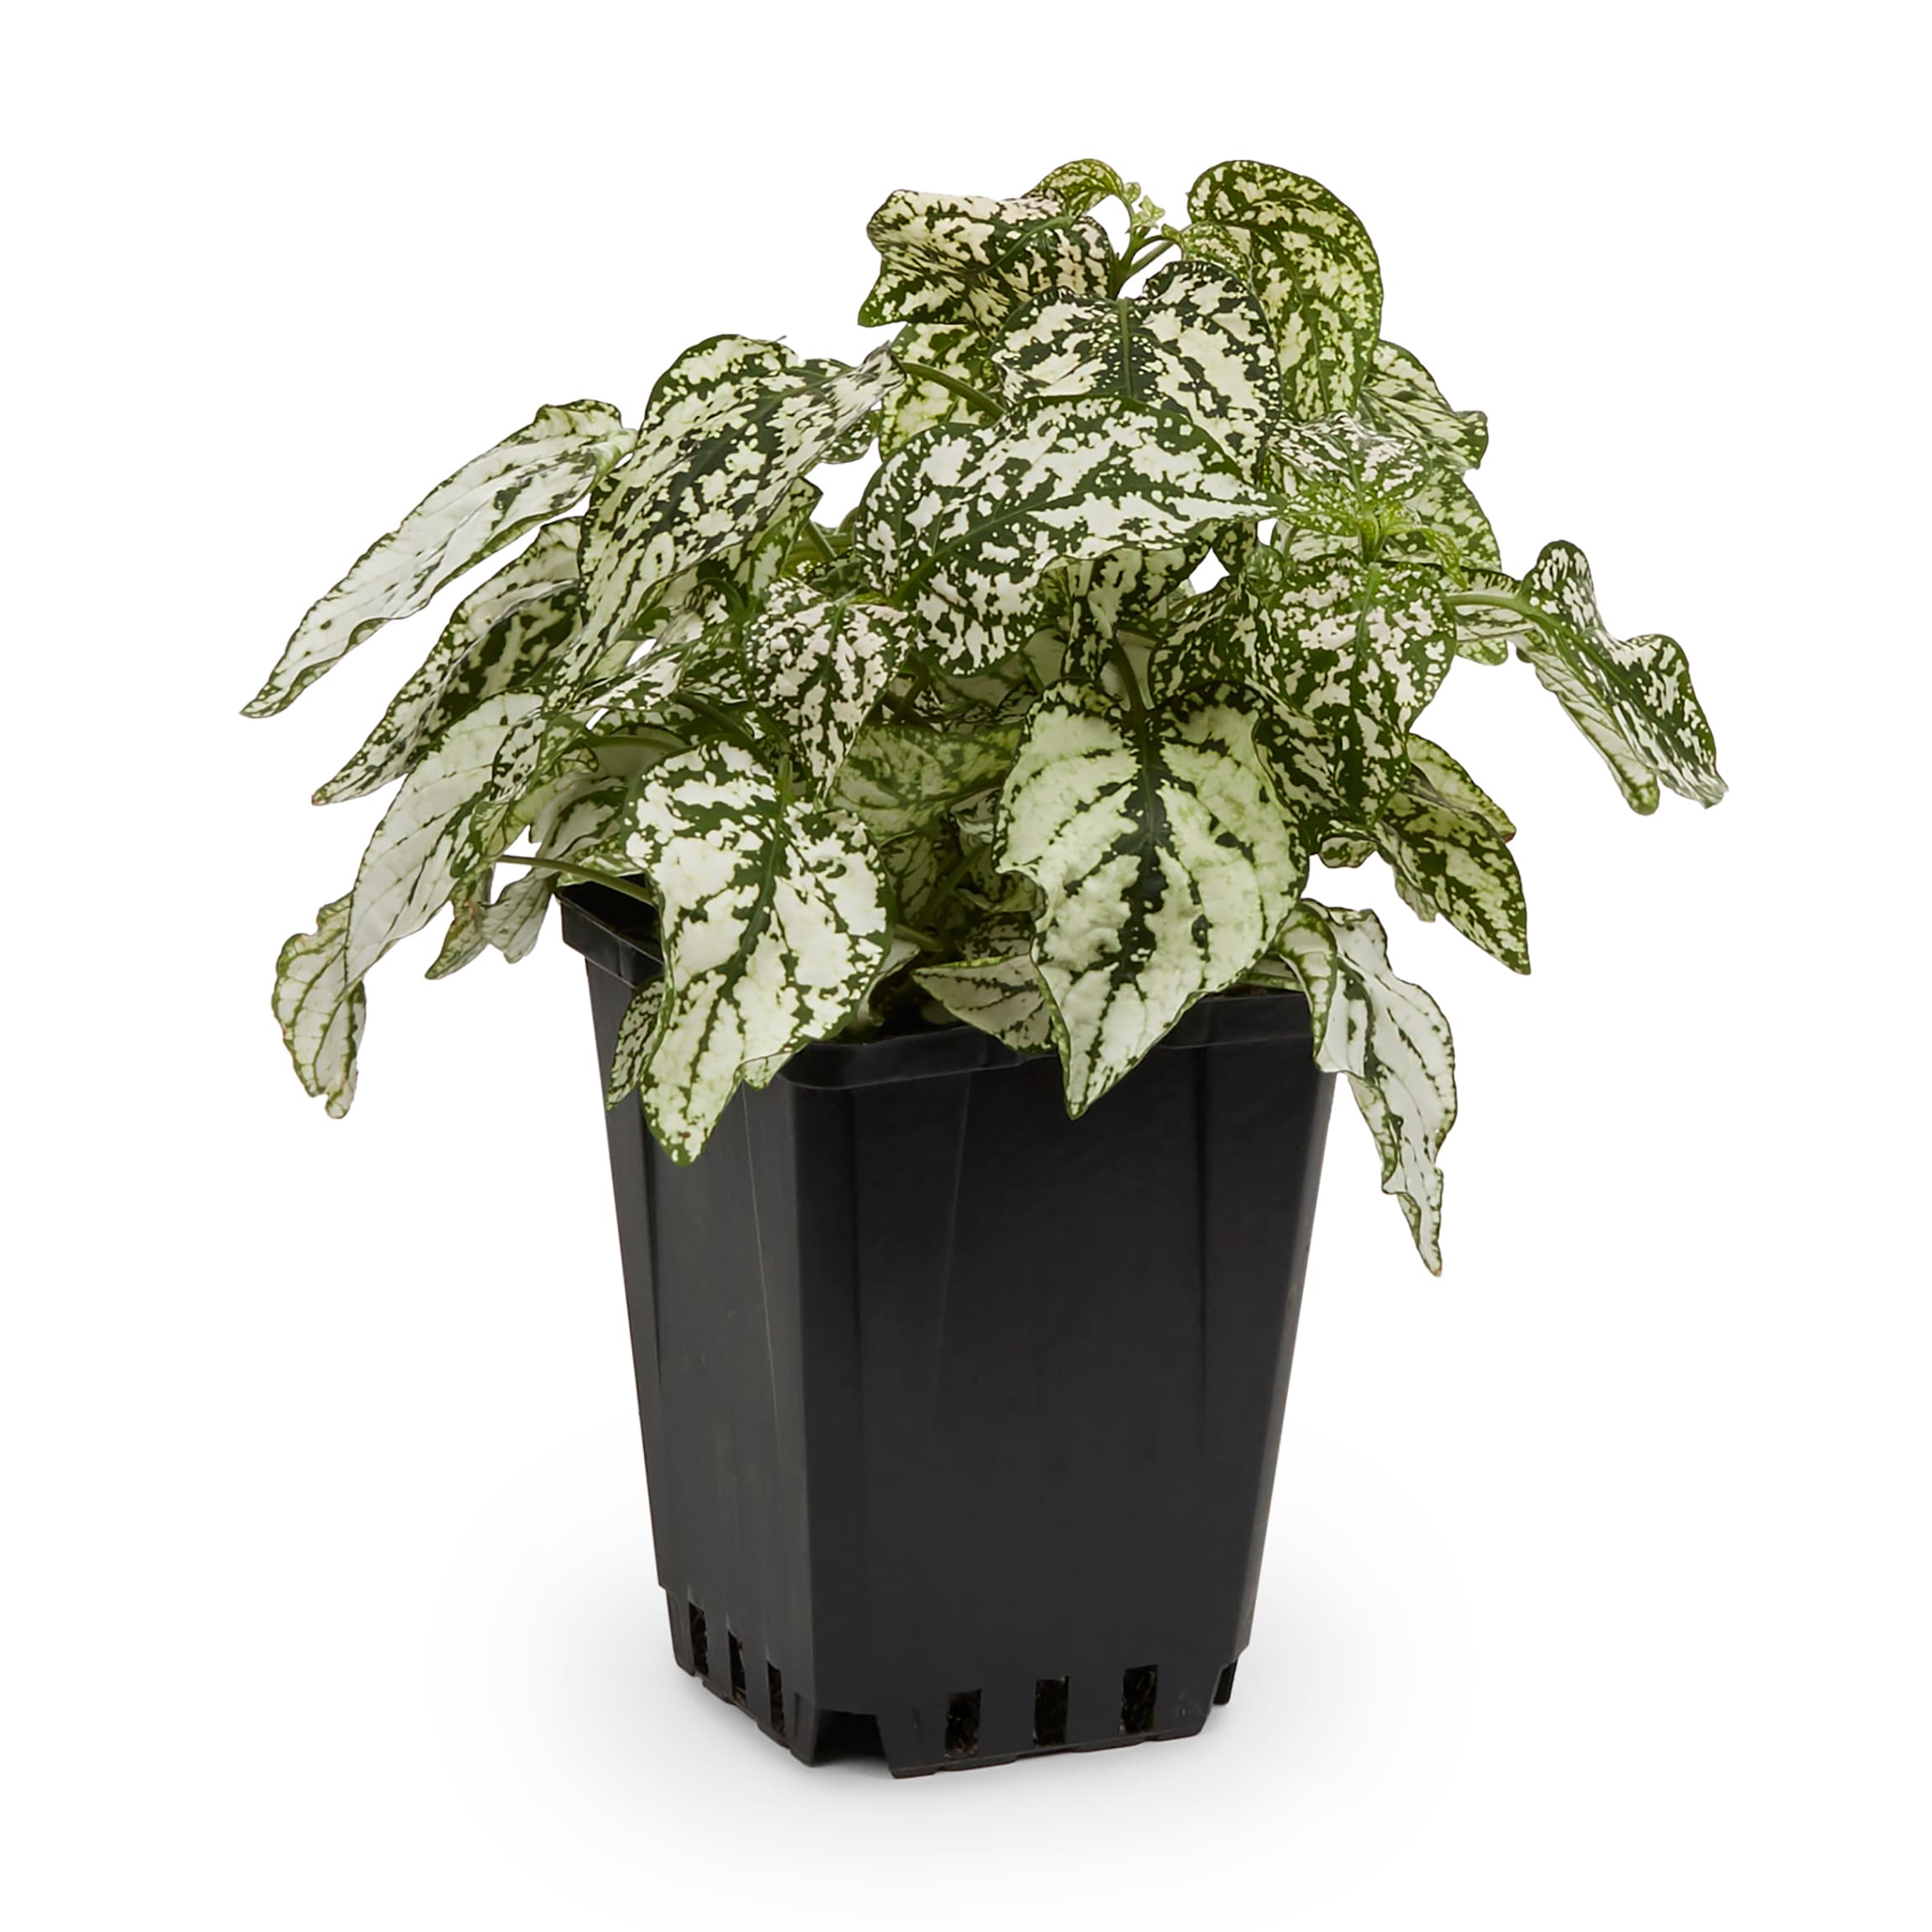 Lowe's Polka Dot Plant in 1-Pint Pot at Lowes.com